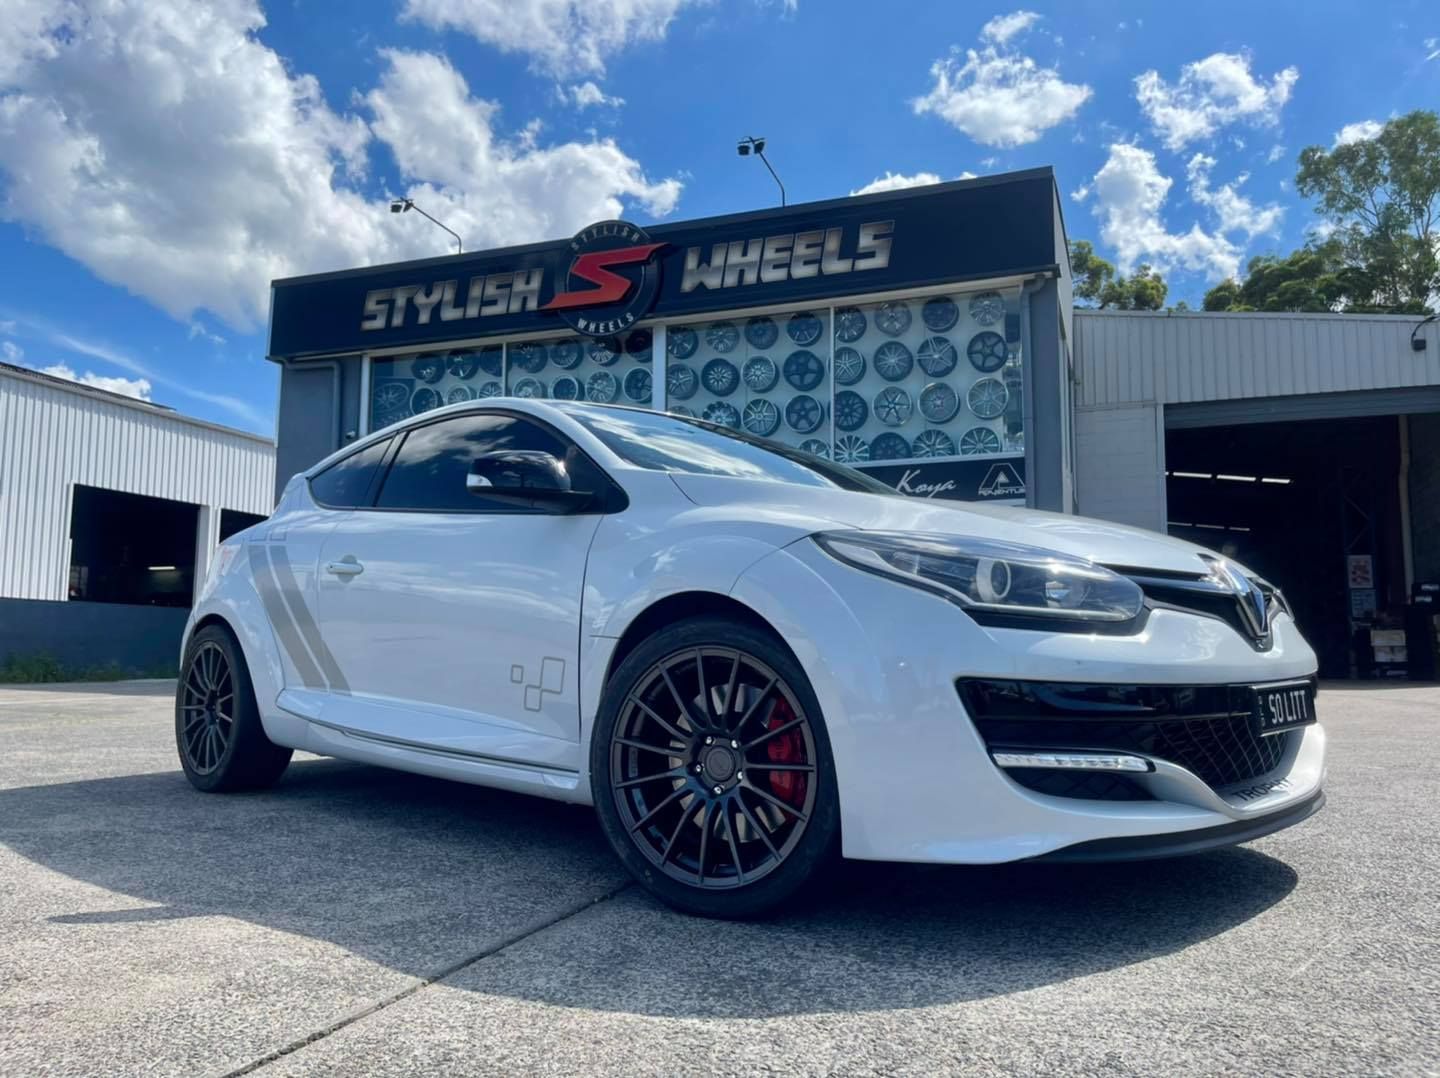 Renault Megane RS with 18-inch Koya SF05